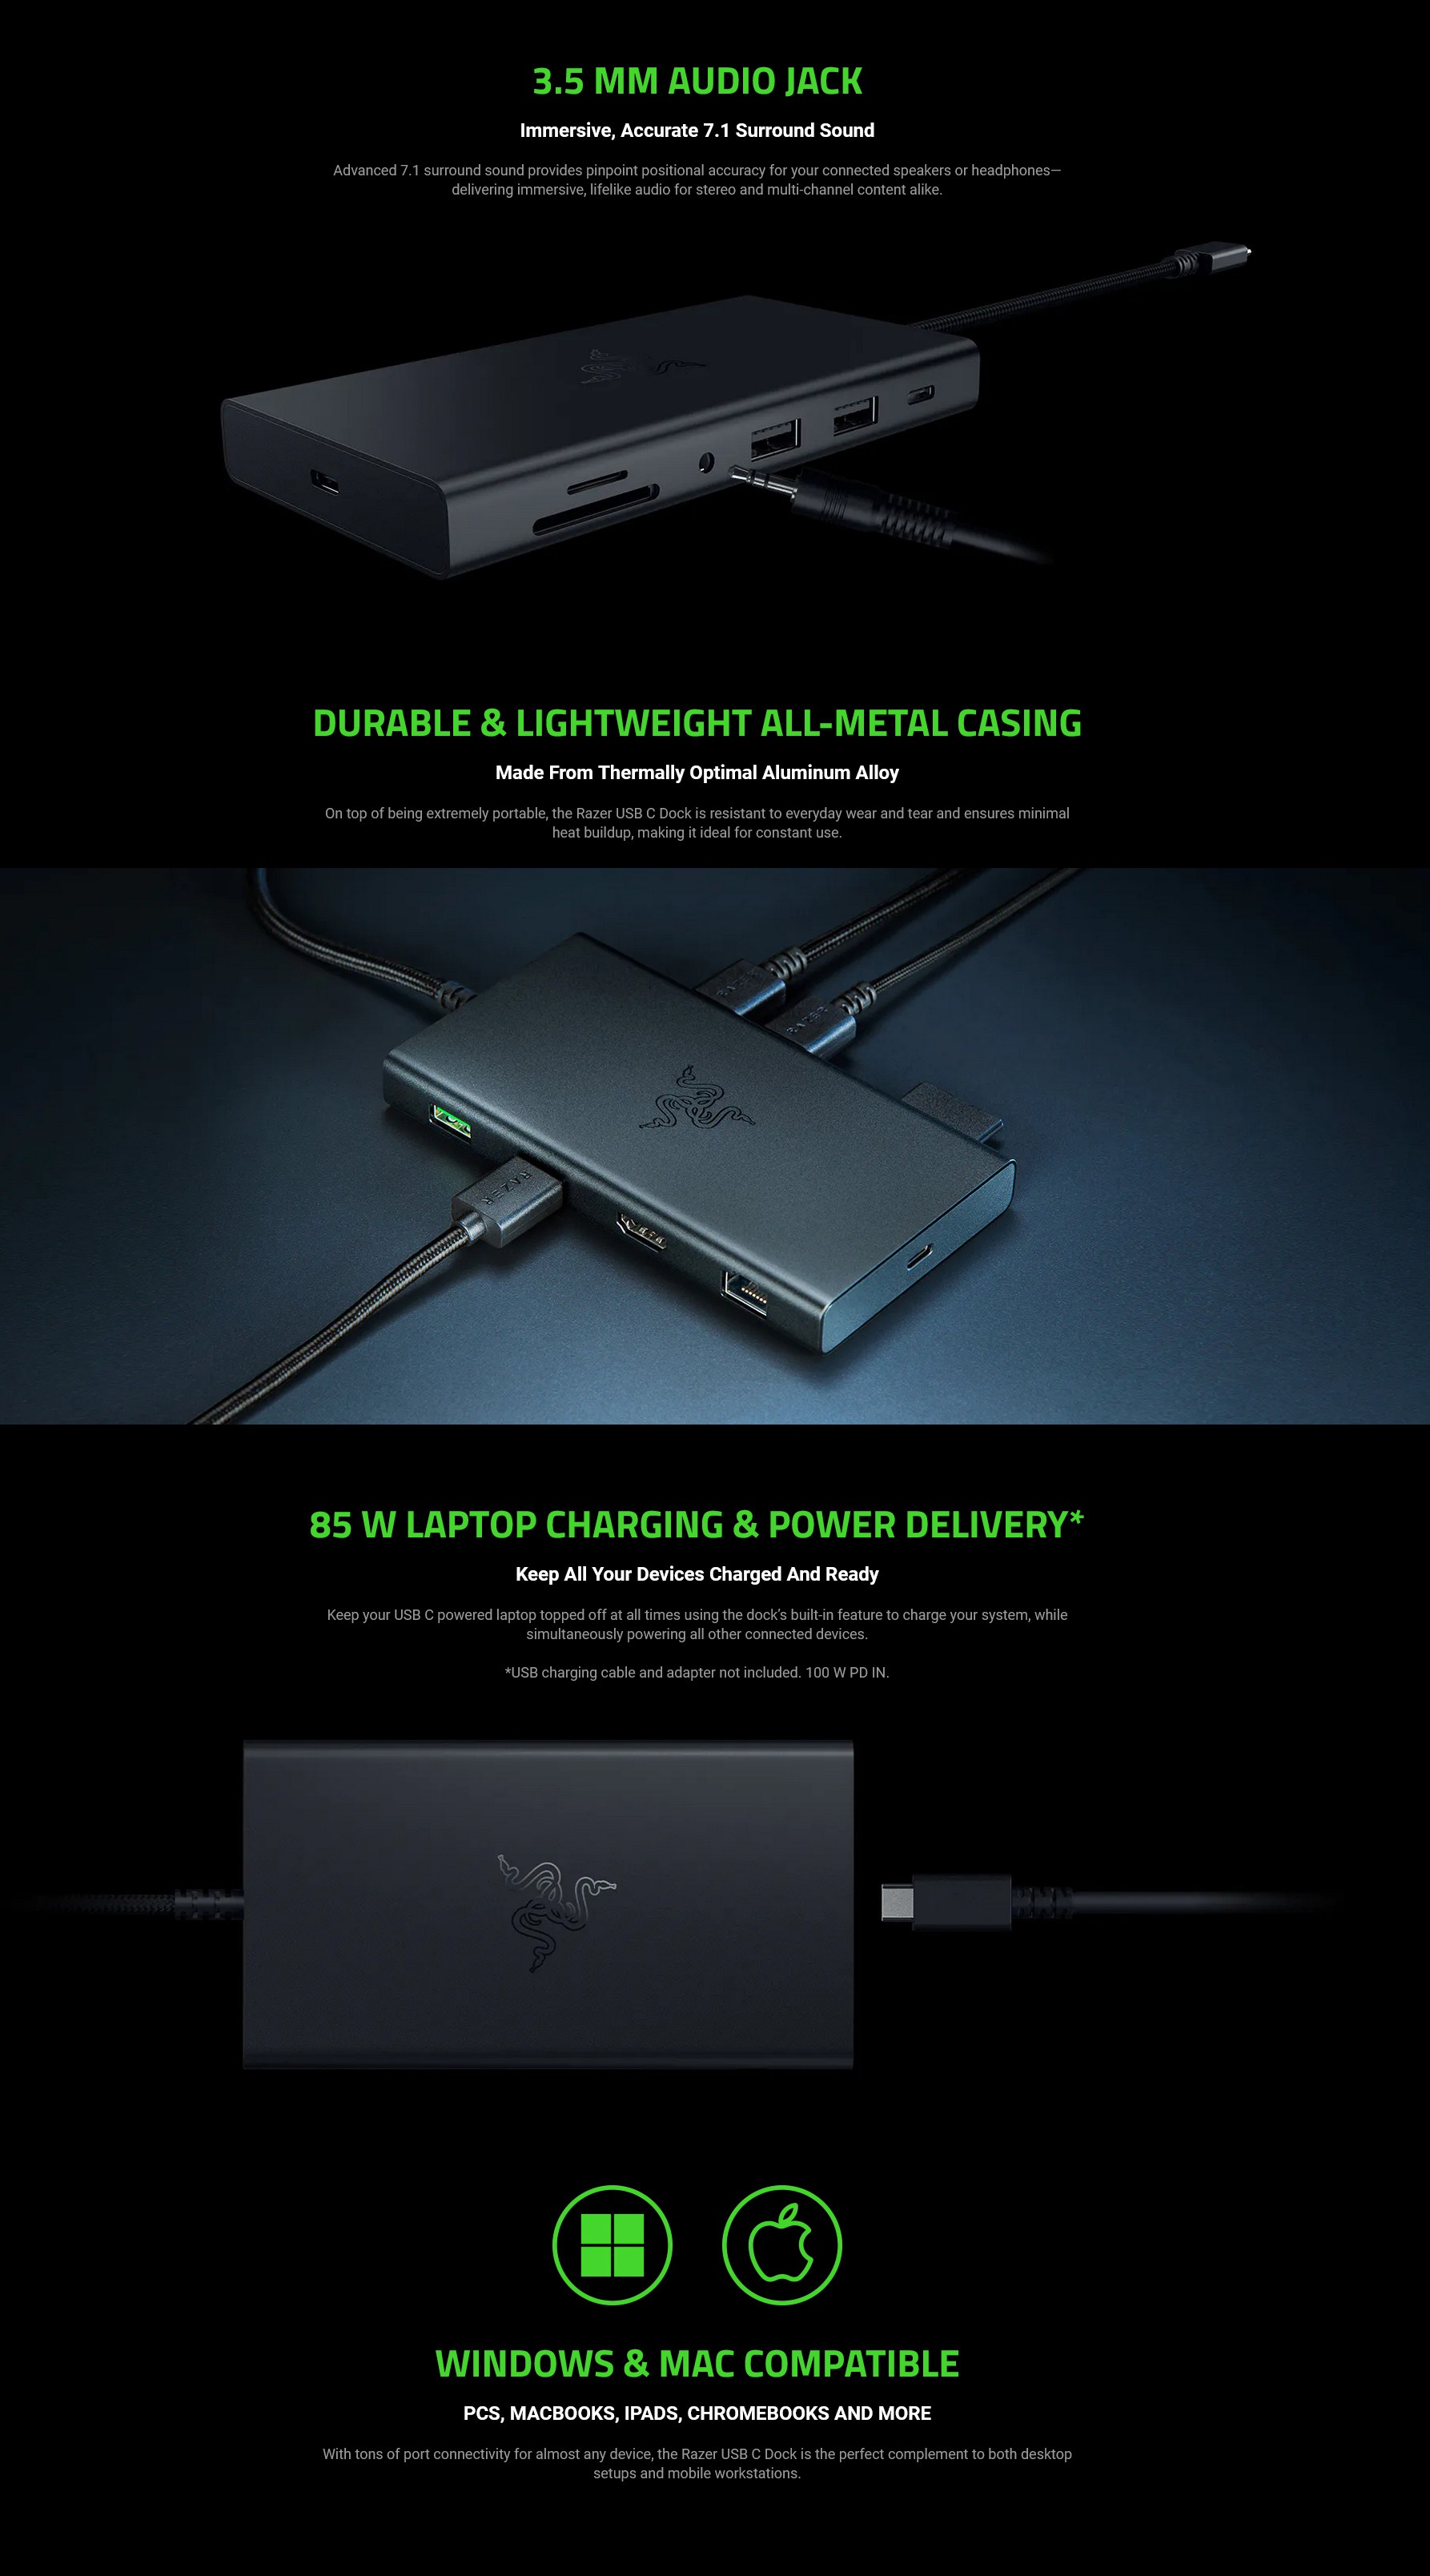 A large marketing image providing additional information about the product Razer USB-C Dock - 11-in-1 Multiport Adapter (Black) - Additional alt info not provided